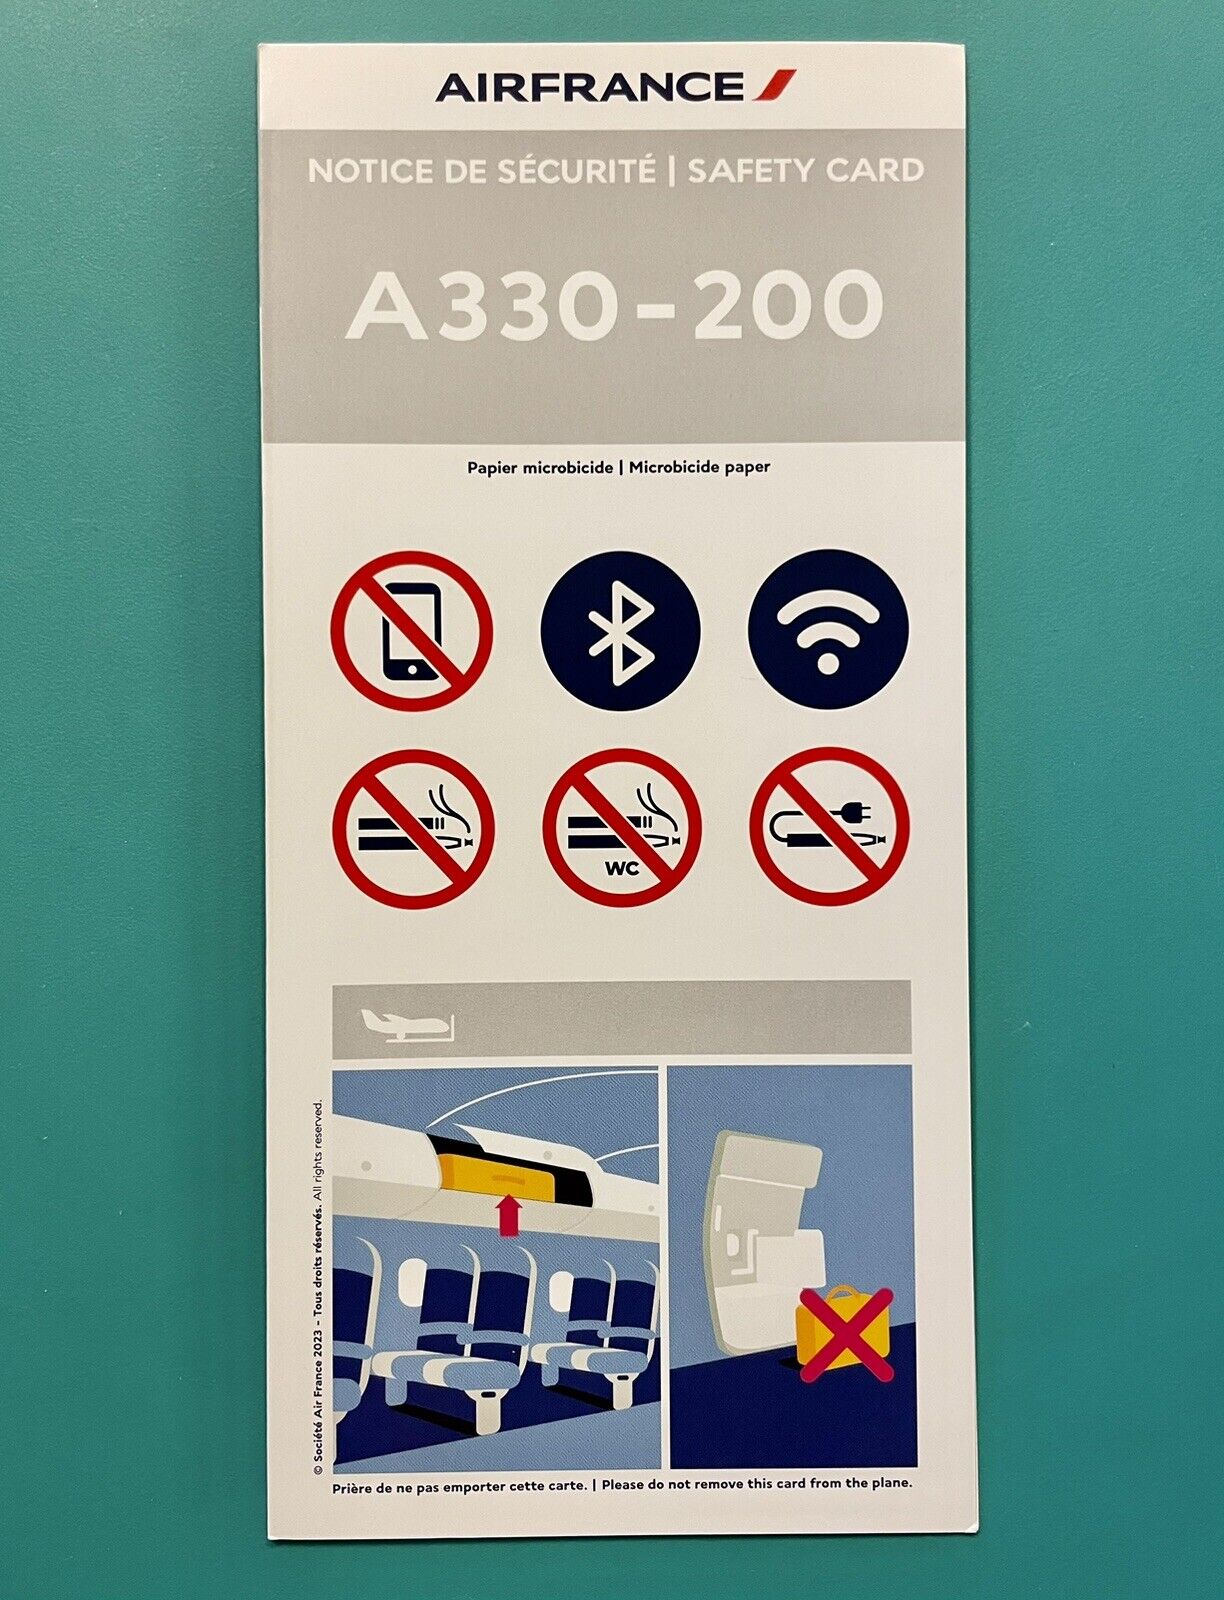 2023 AIR FRANCE SAFETY CARD — AIRBUS 330-200